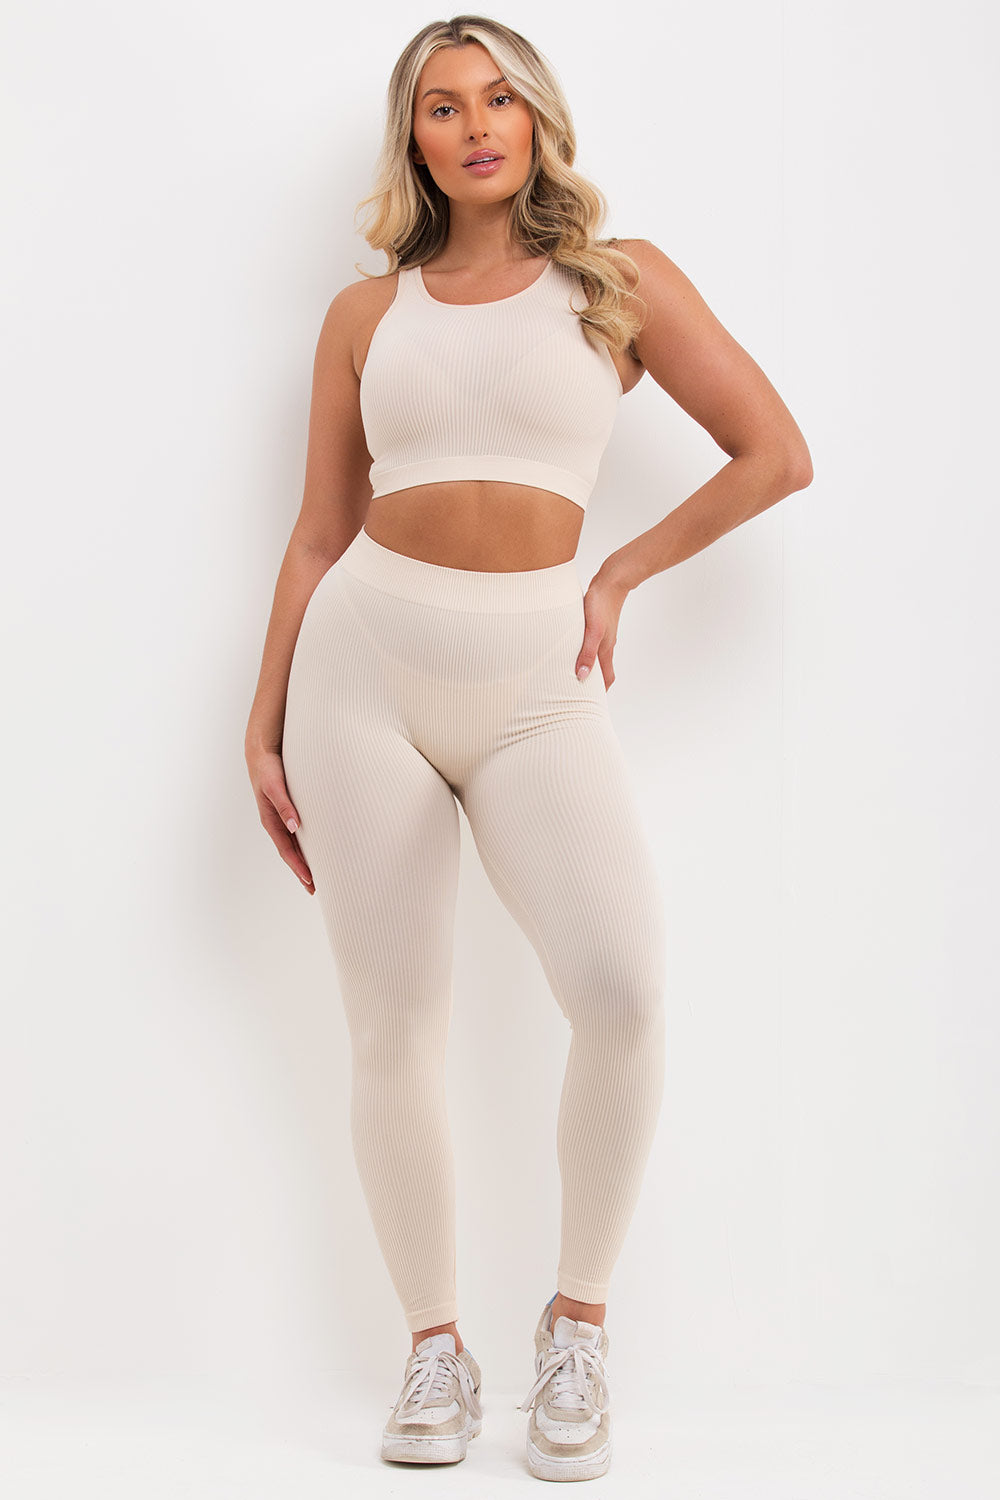 MAMA 2-piece Ribbed Top and Leggings Set - Light beige - Ladies